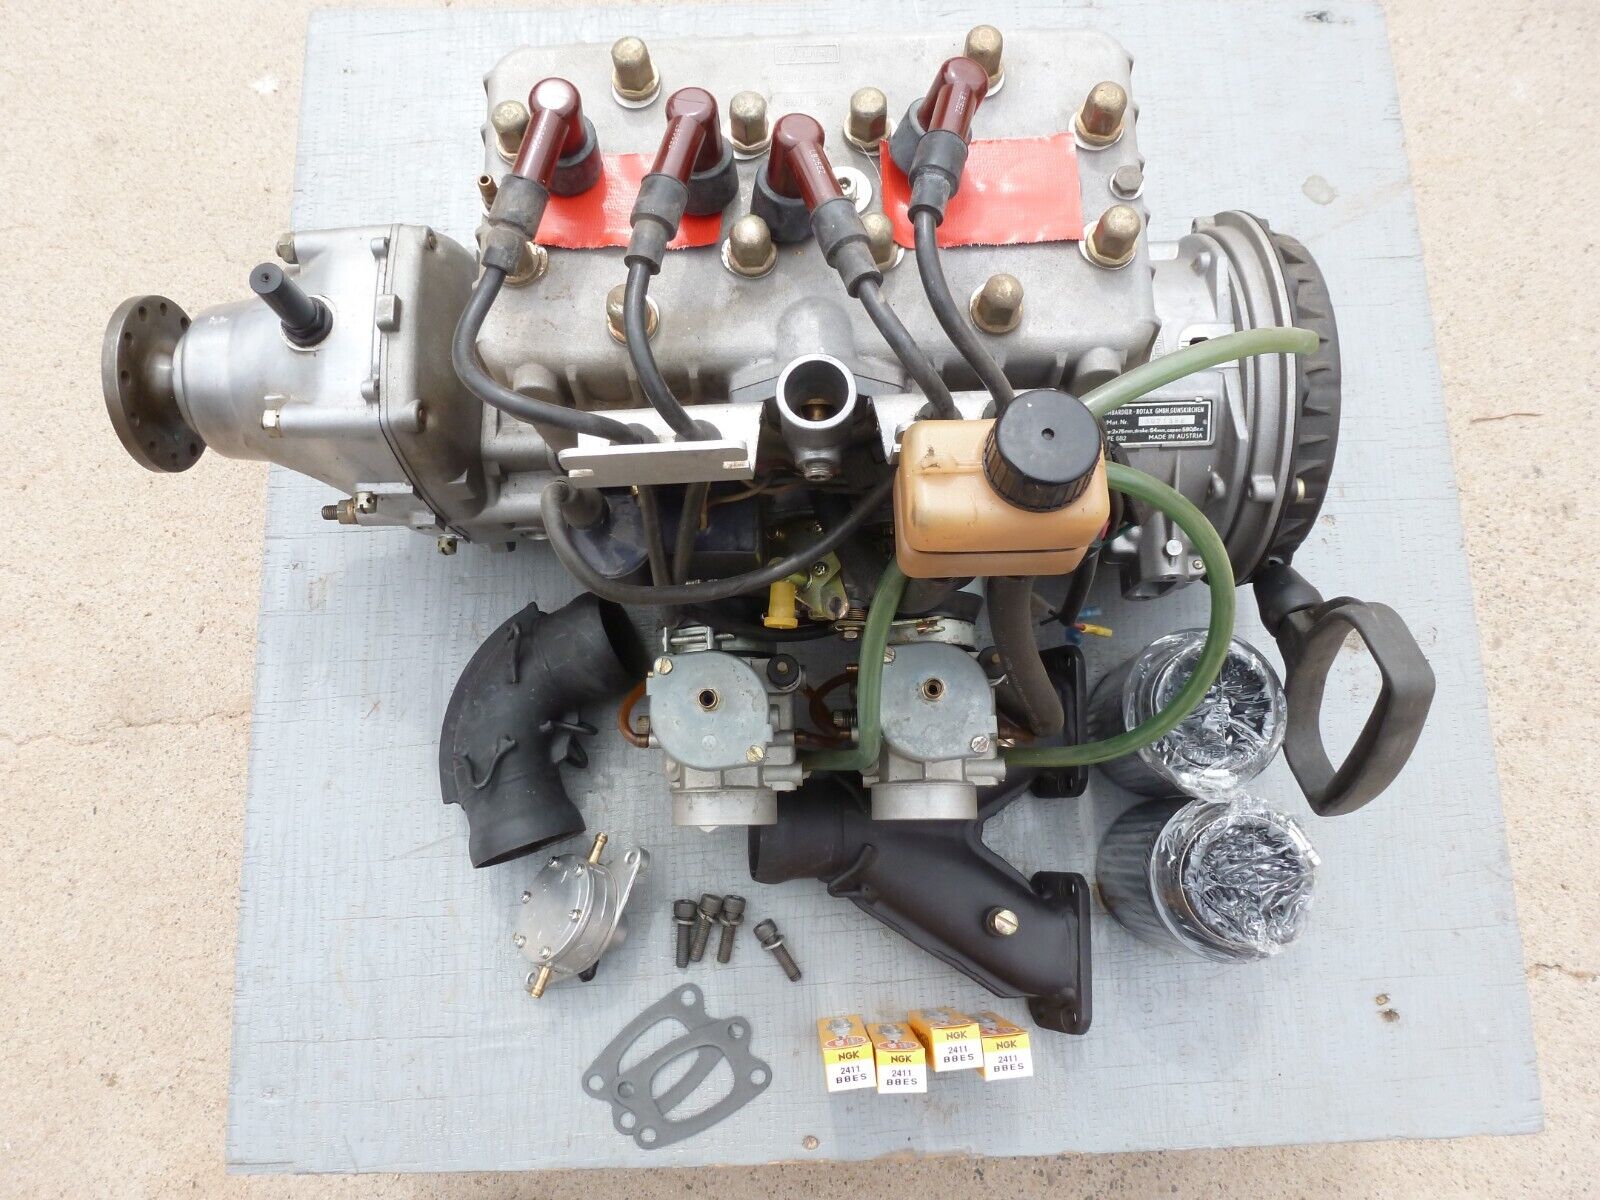 Rotax  aircraft engine  Rebuilt O time  ready to install , warranty